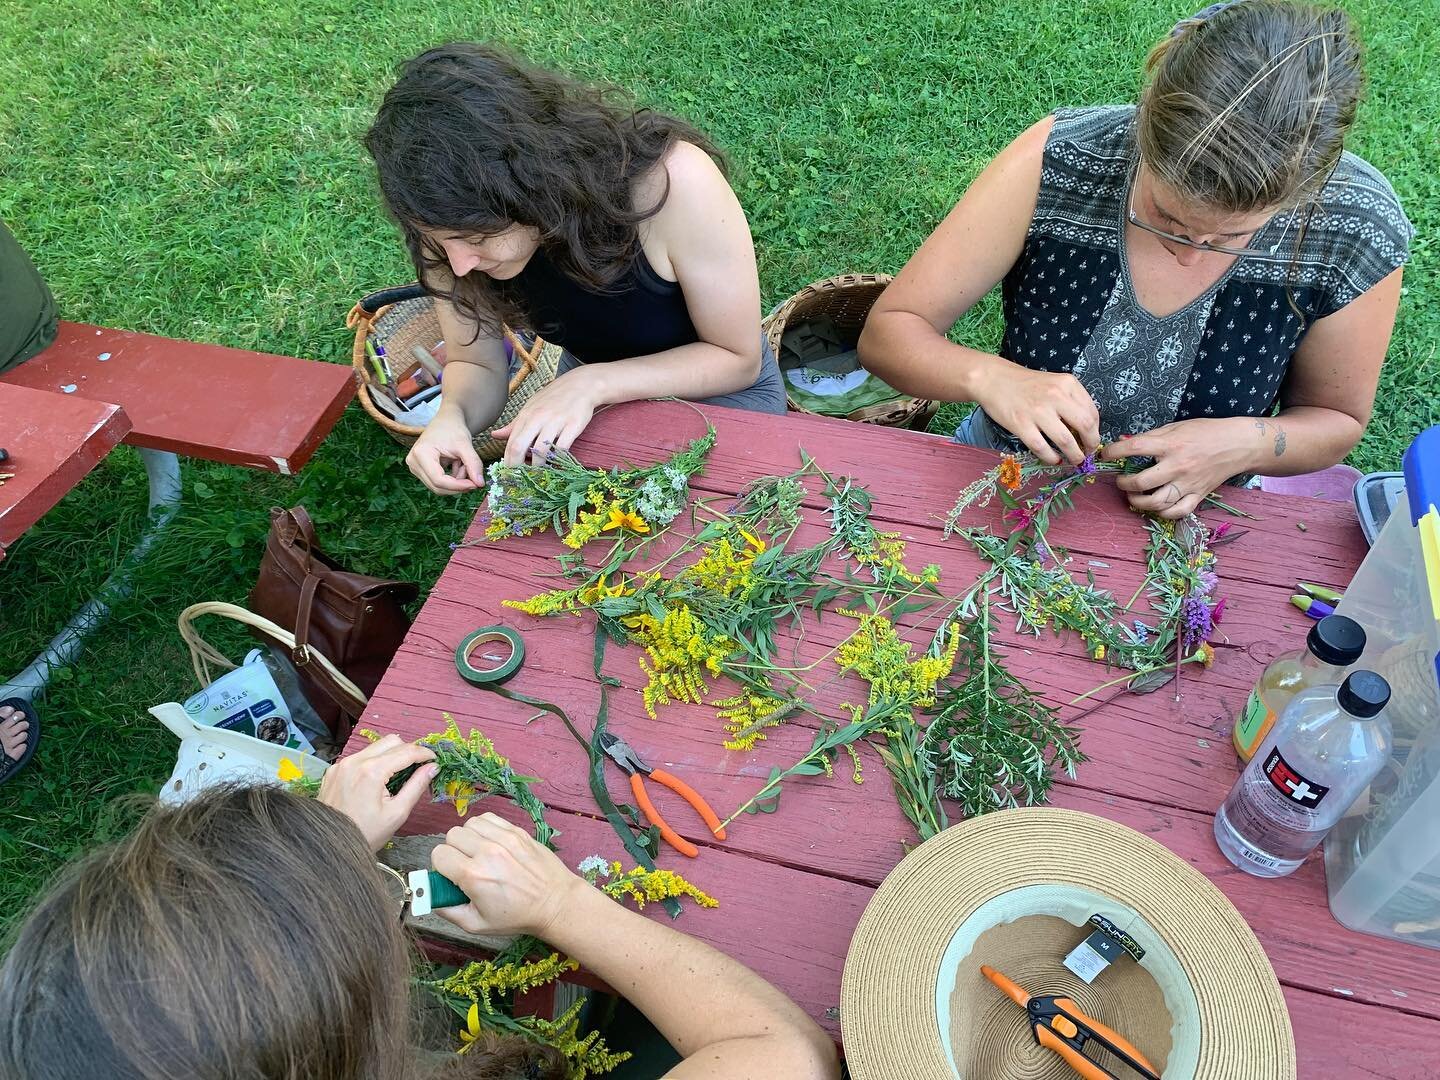 Last week&rsquo;s apprenticeship was our final gathering in August, which for many of us educators (and parents) means a shift in scheduling and &ldquo;back to school&rdquo; time. Flower crowns seemed like the perfect way to celebrate the end of a bu